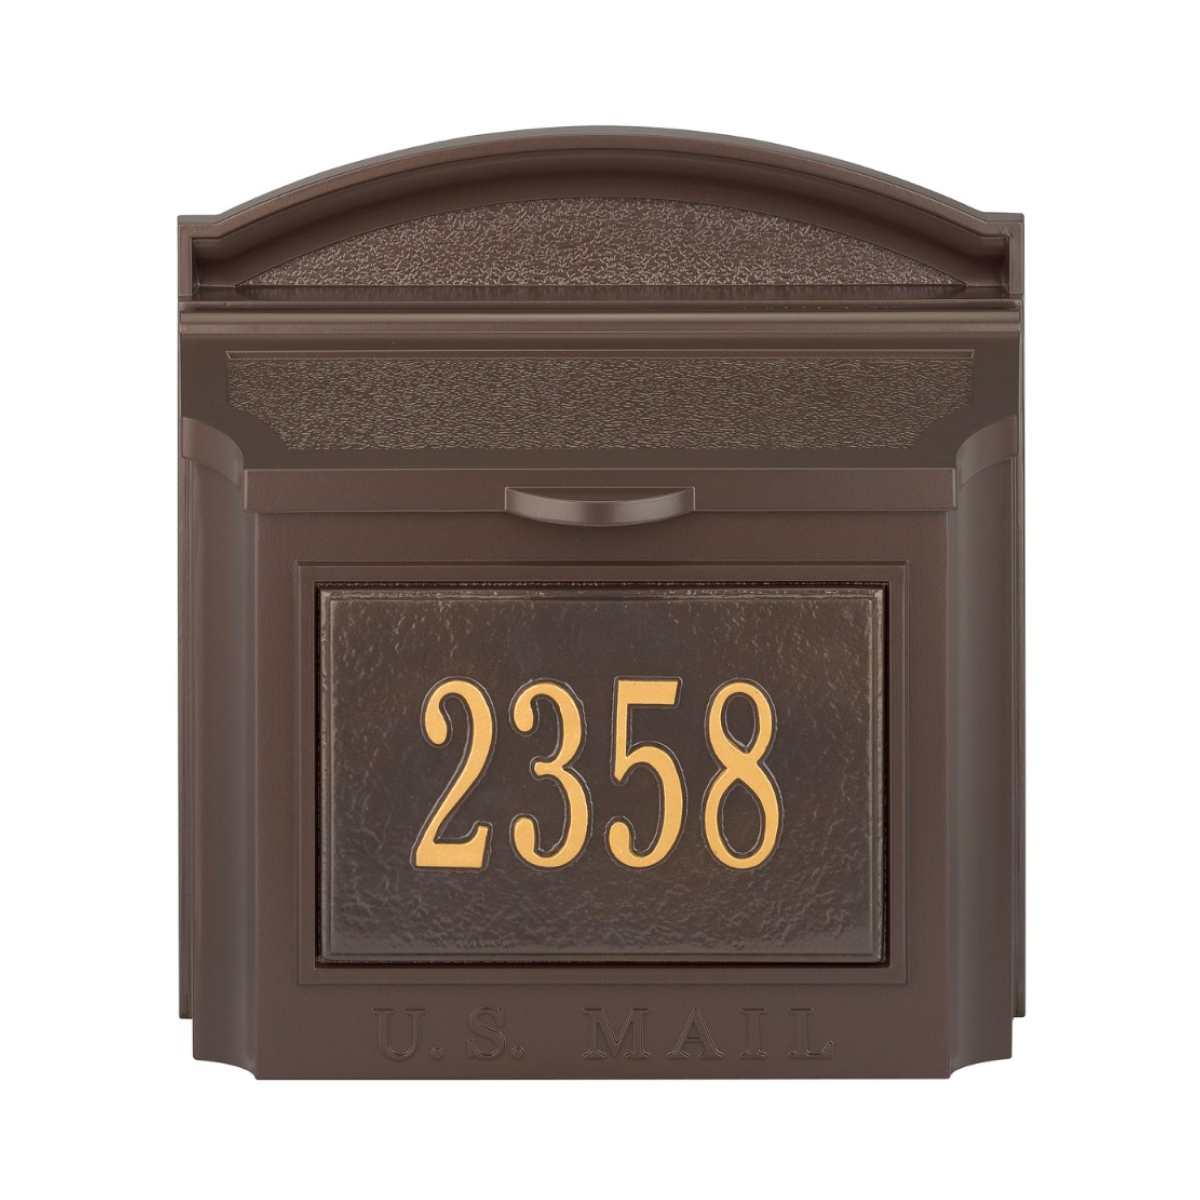 Whitehall Wall Mount Mailbox with Removable Locking Insert Product Image